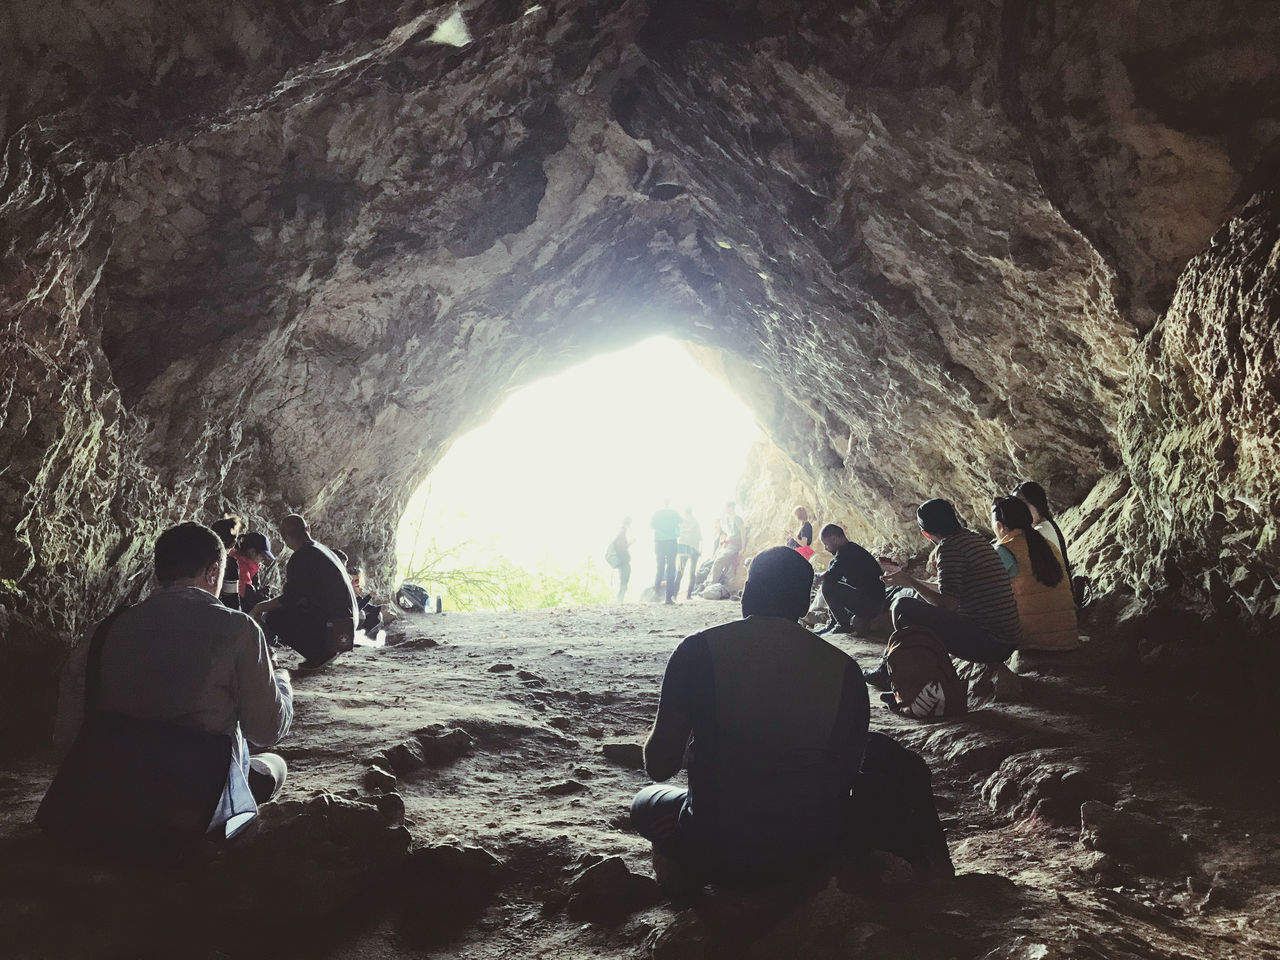 PEOPLE IN CAVE